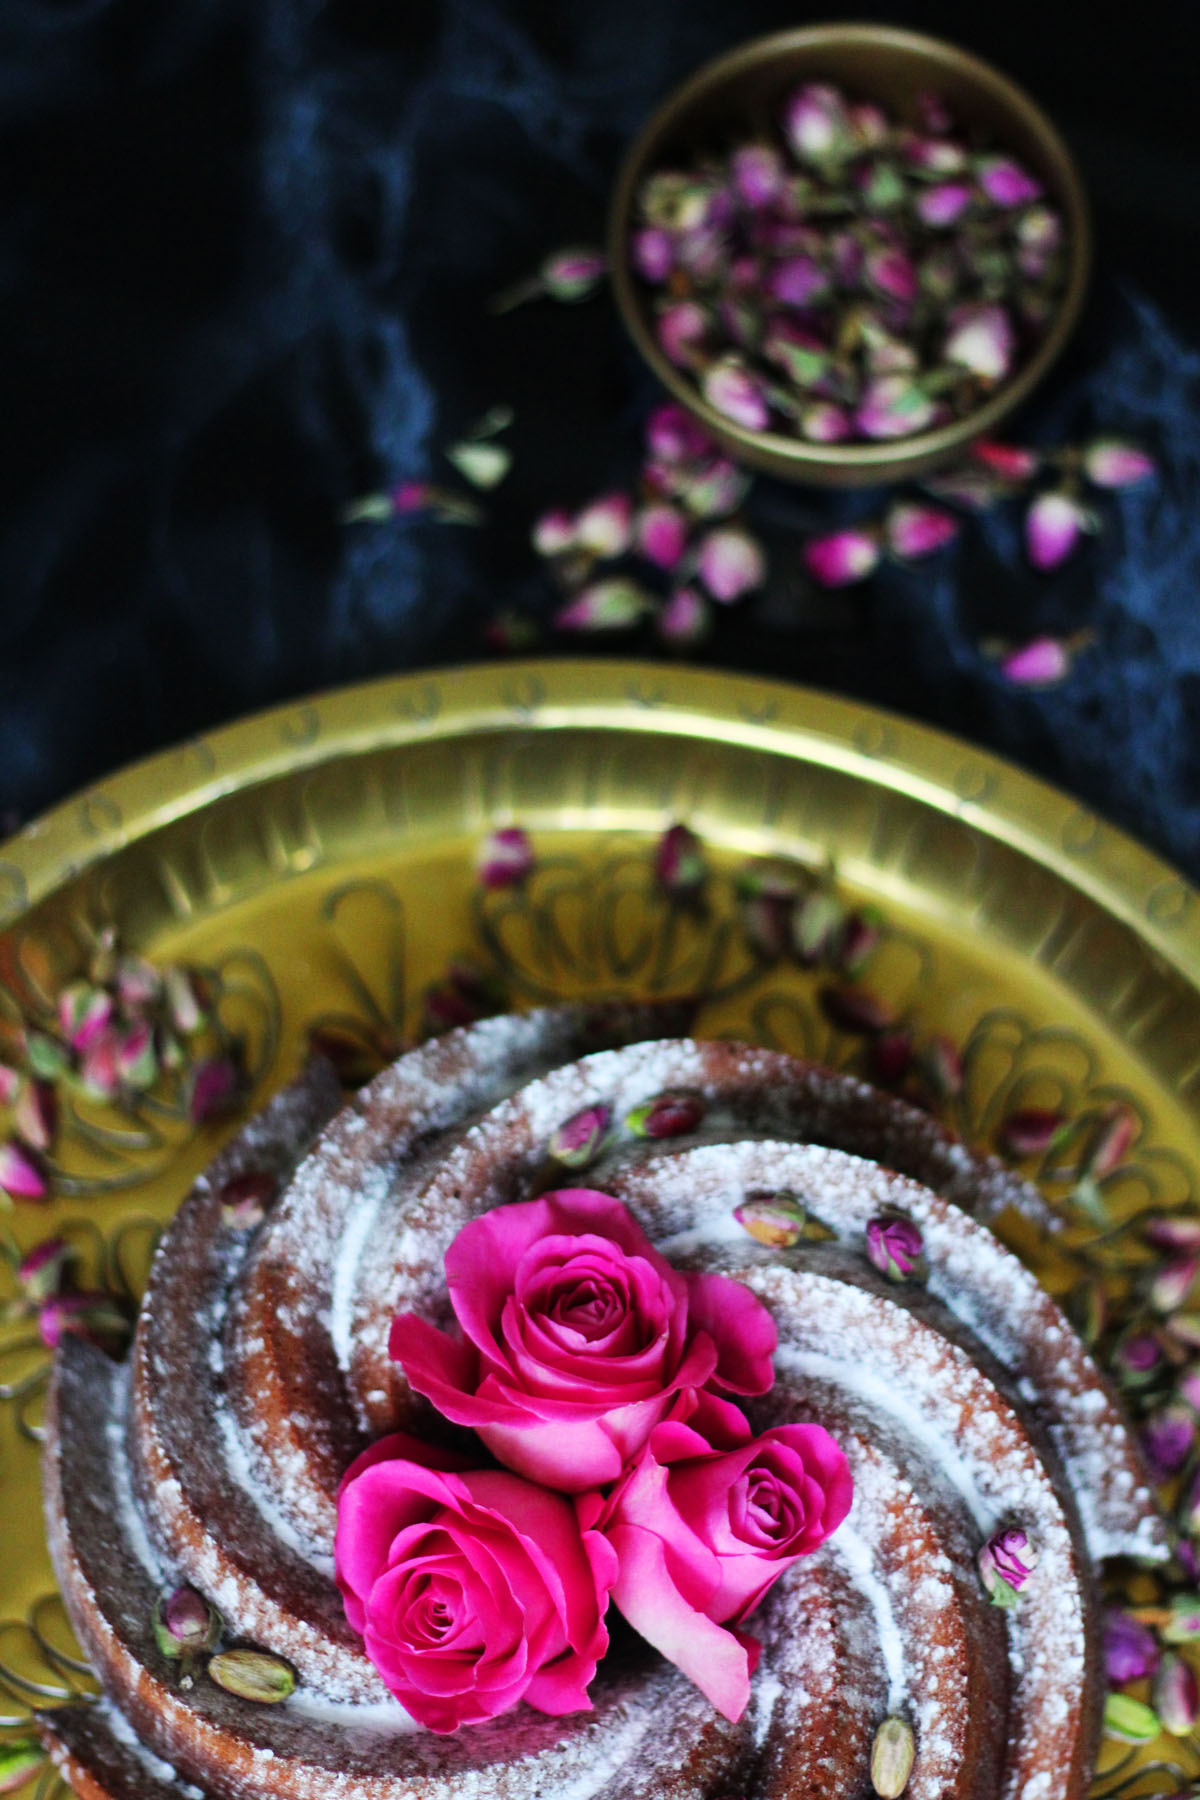 This Persian Love Bundt is based on the classic Persian Love Cake made with almonds pistachios rose and saffron its the perfect cake for Valentines Day